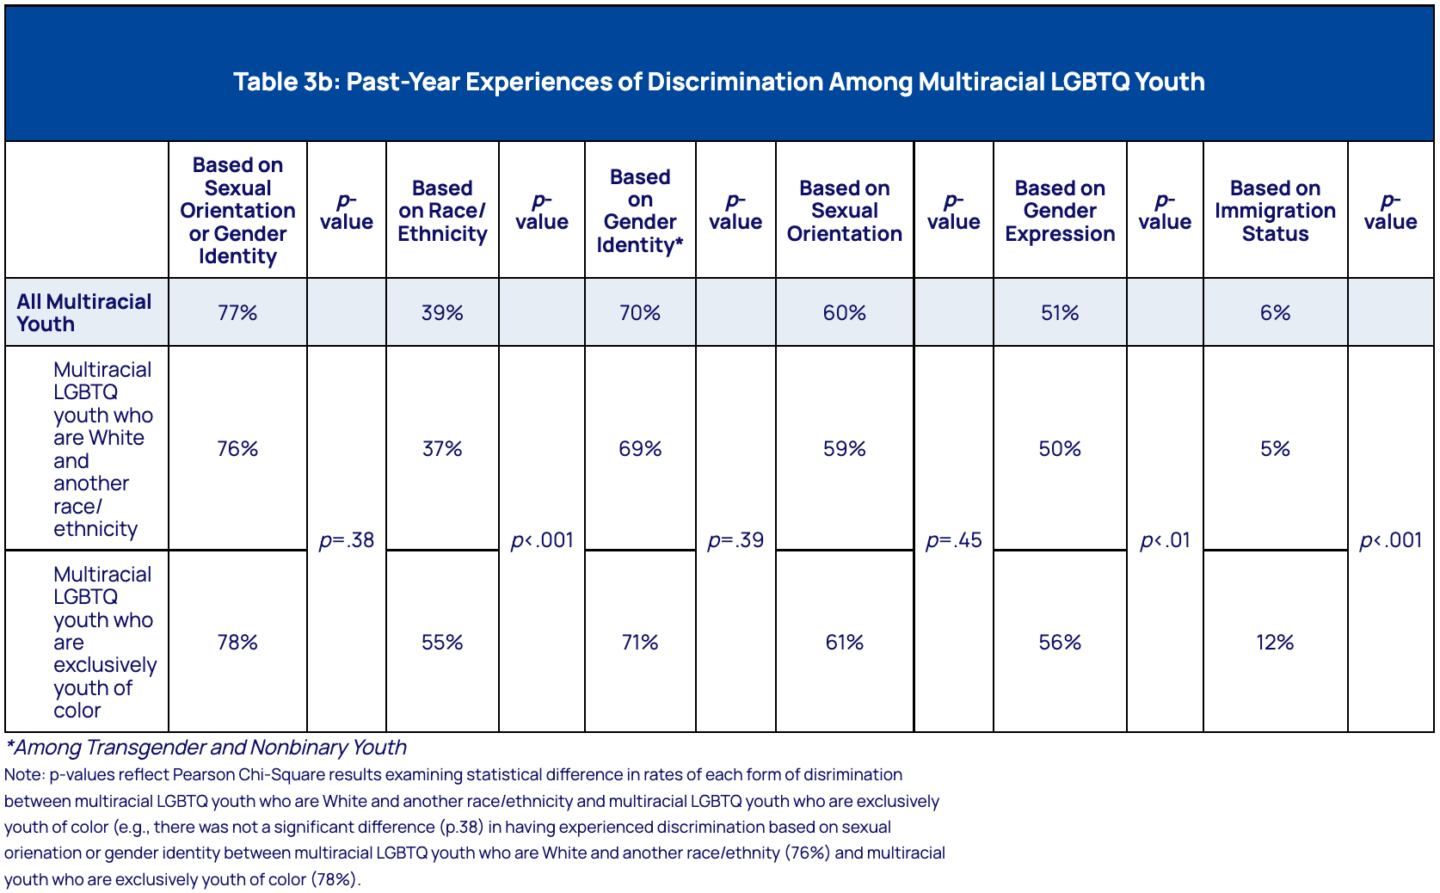 Past-Year Experiences of Discrimination Among Multiracial LGBTQ Youth Table